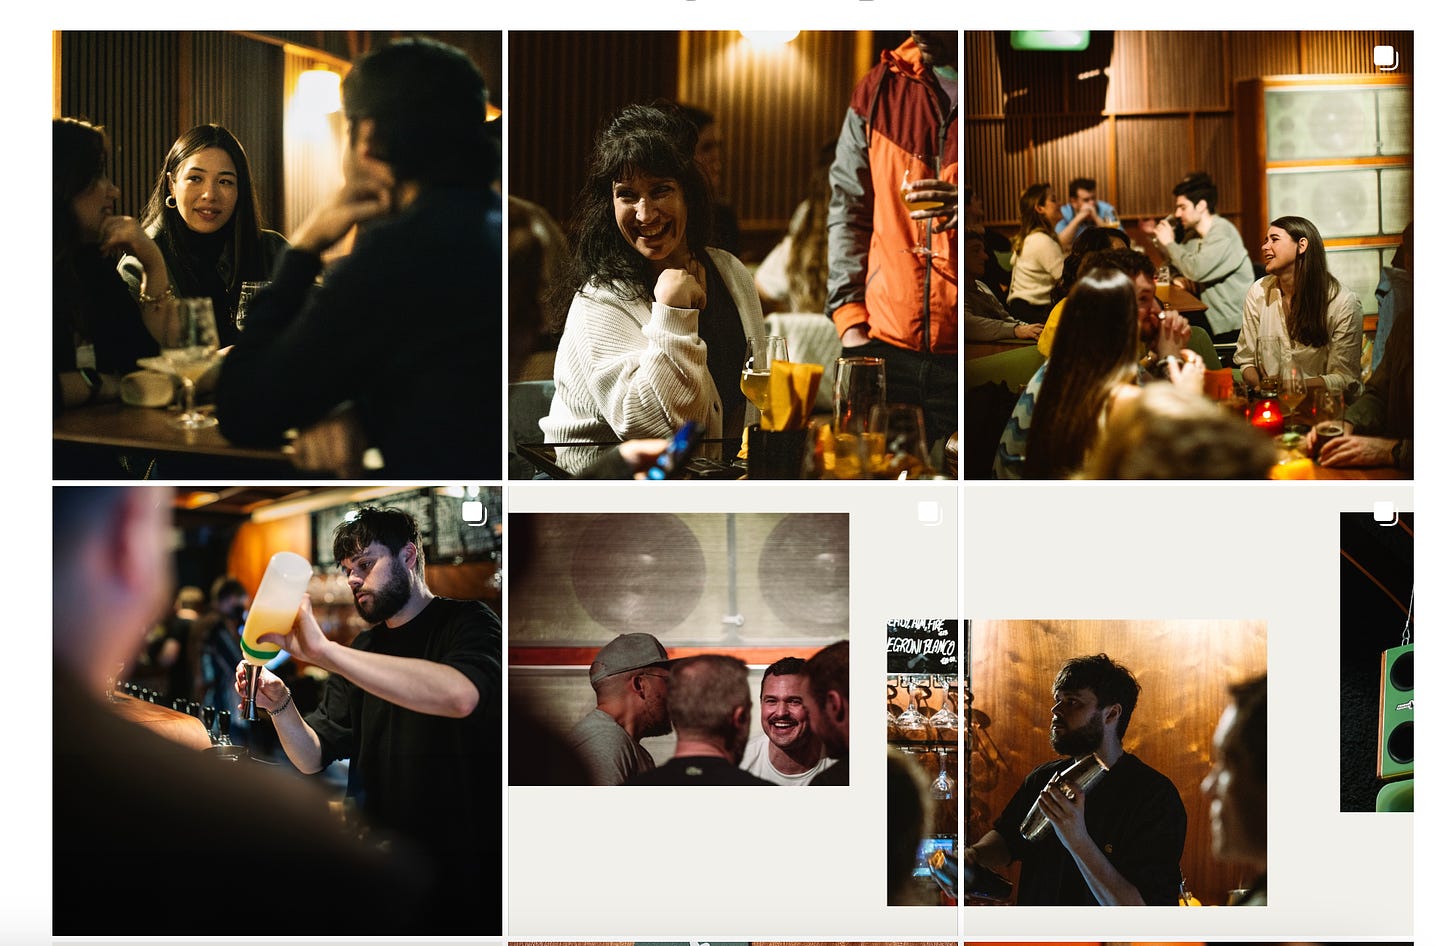 A screen grab of Fidelity's Insta page. Each photo contributes to an overall vibe of the bar: people laughing, bar staff pouring drinks and making cocktails, impressive looking speakers hung in the wood panelled walls. 